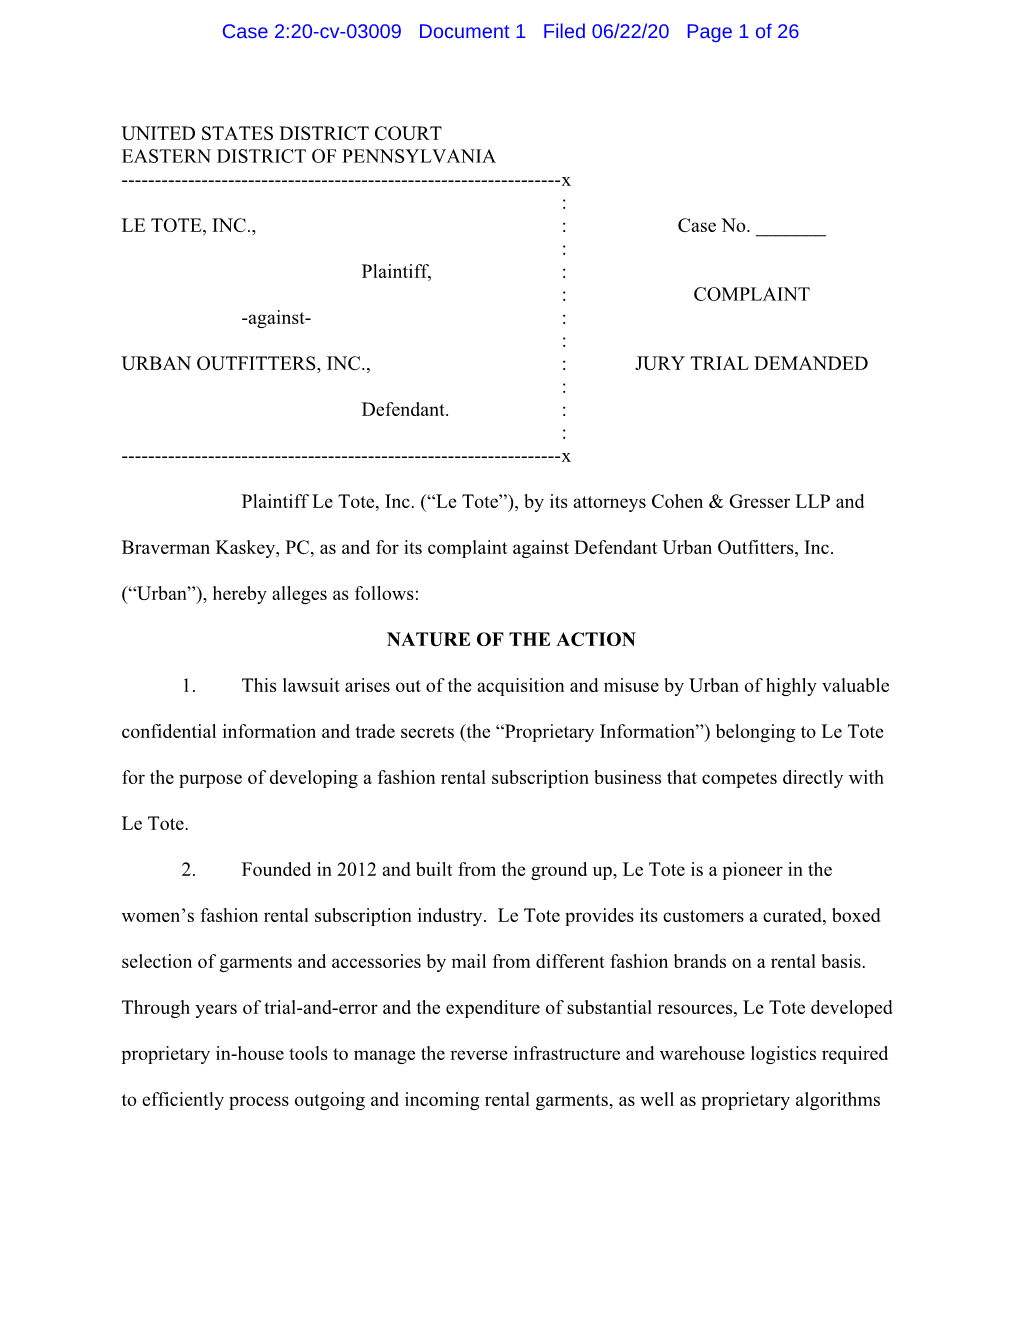 UNITED STATES DISTRICT COURT EASTERN DISTRICT of PENNSYLVANIA ------X : LE TOTE, INC., : Case No